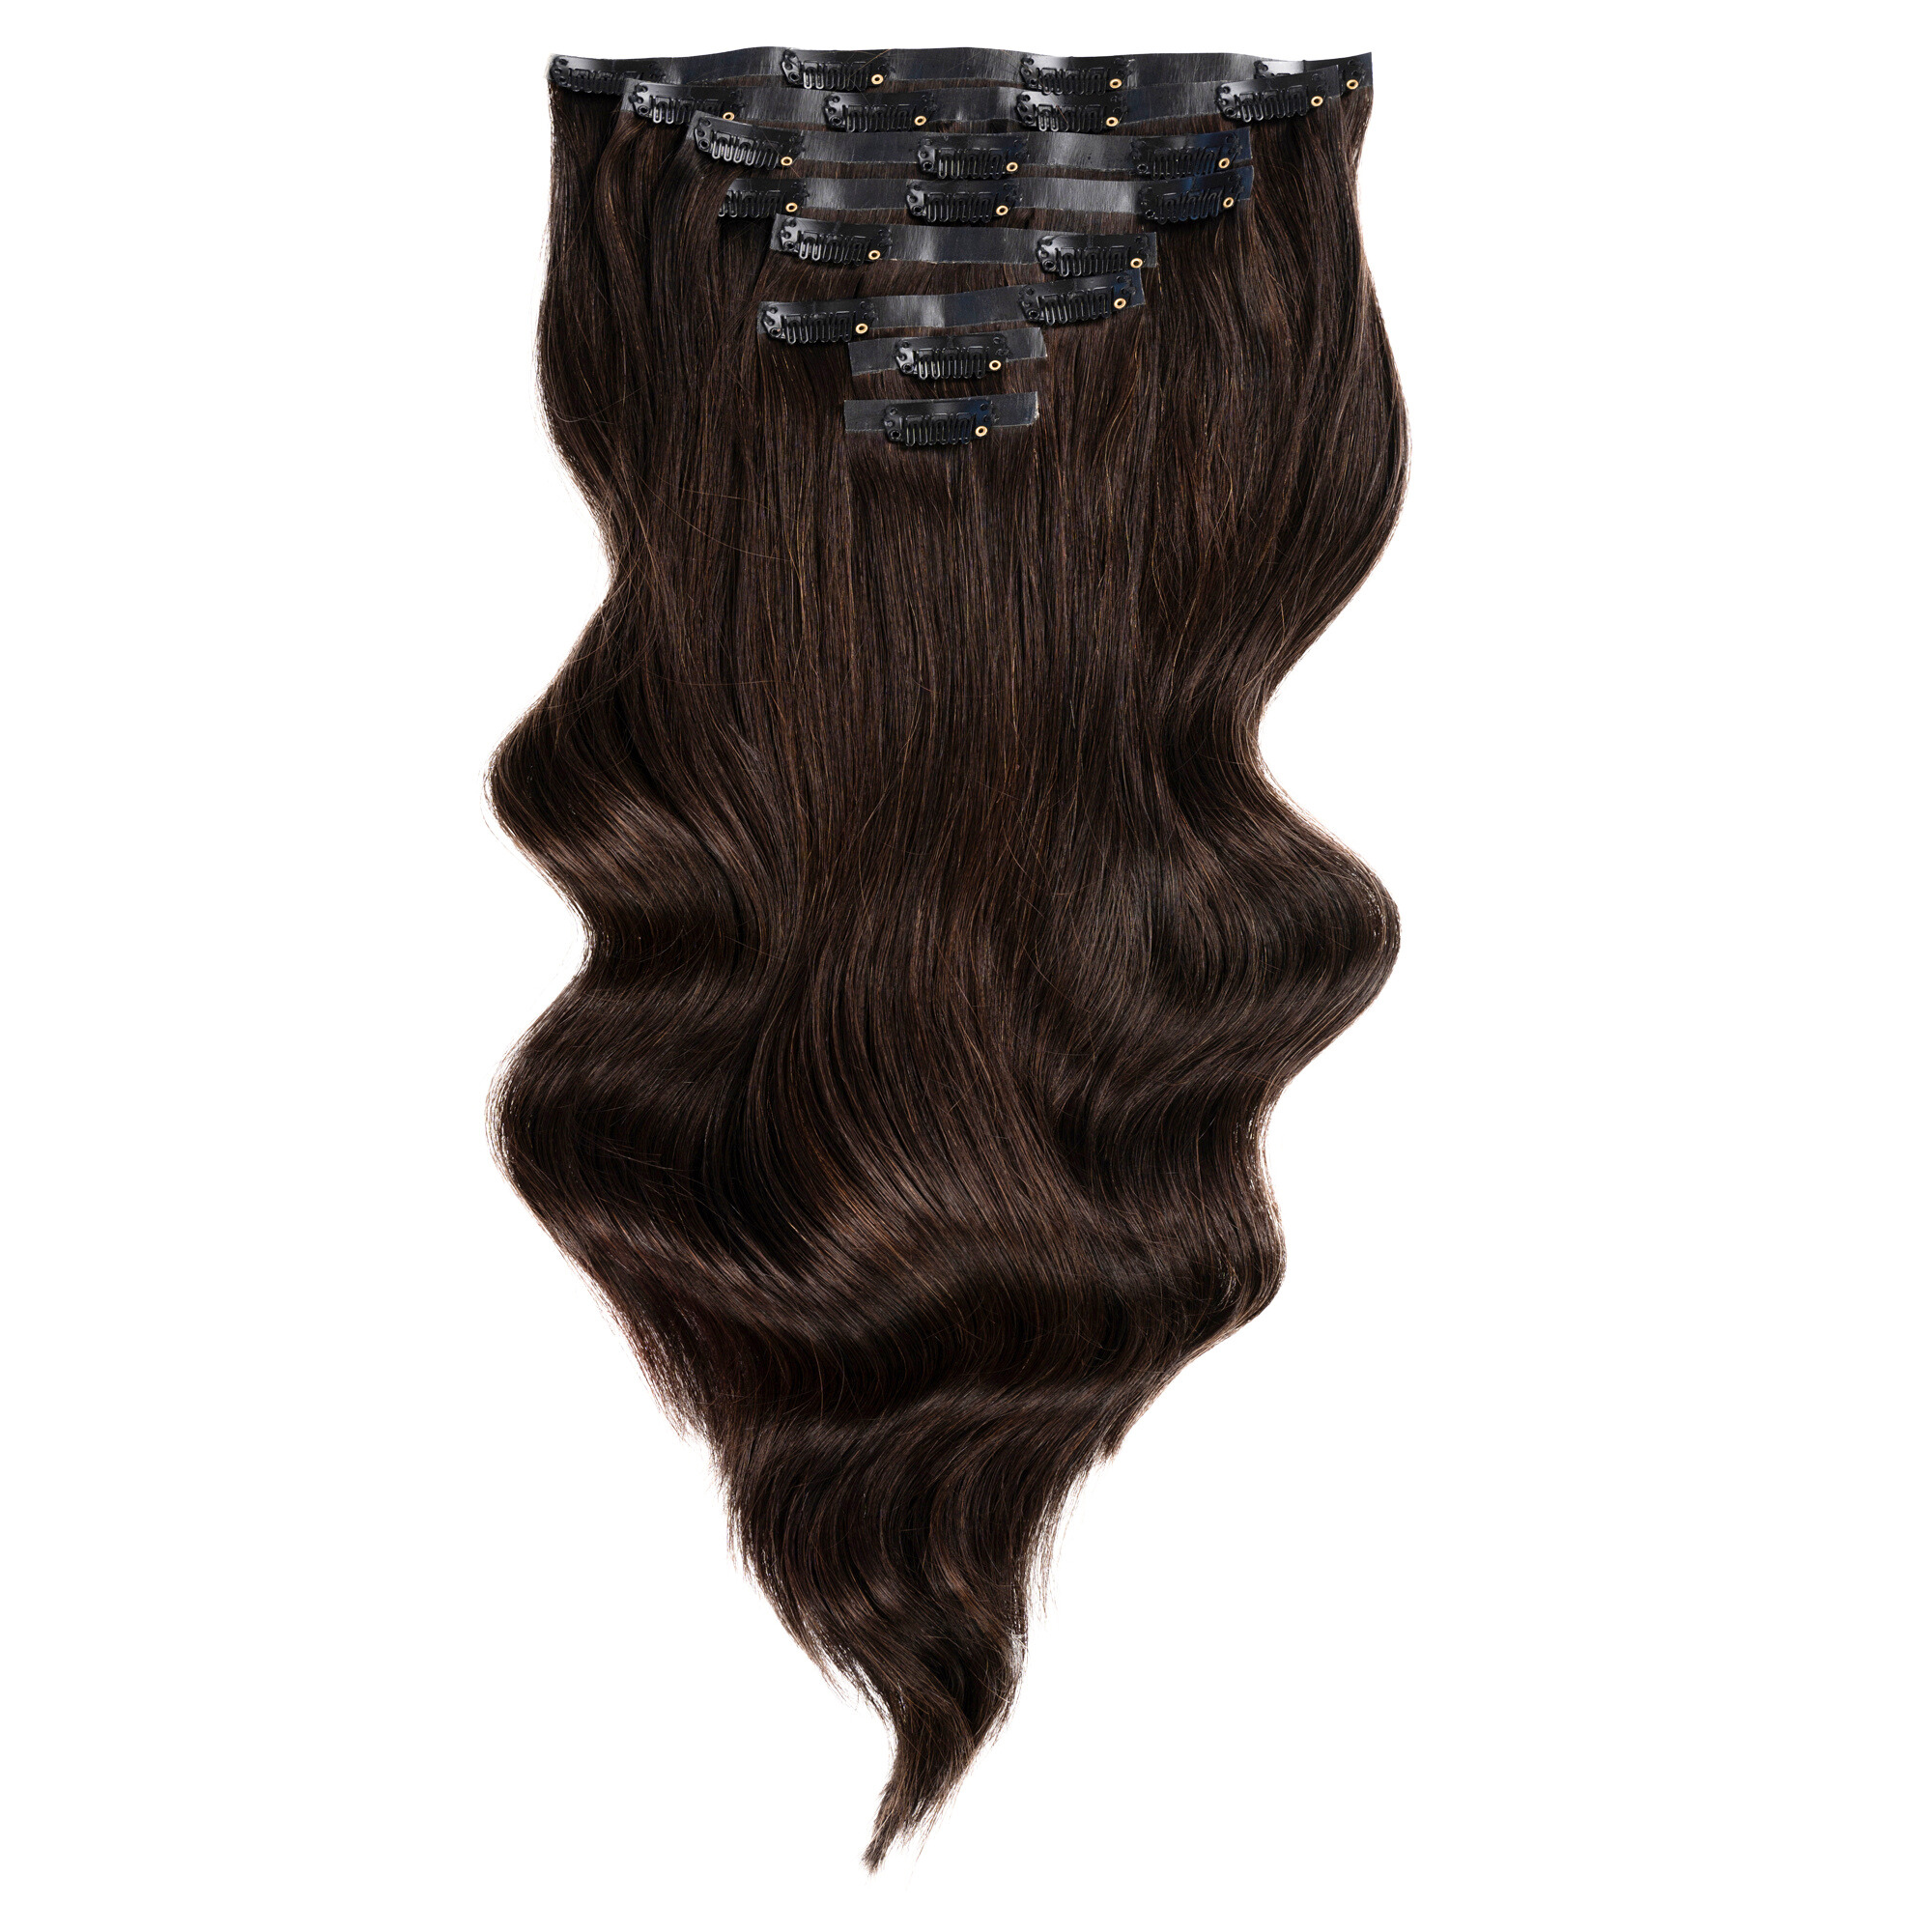 Empress Deluxe Clip-in Hair Extensions 18" Colour 1B Brown/Black - Maneology Hair Extensions